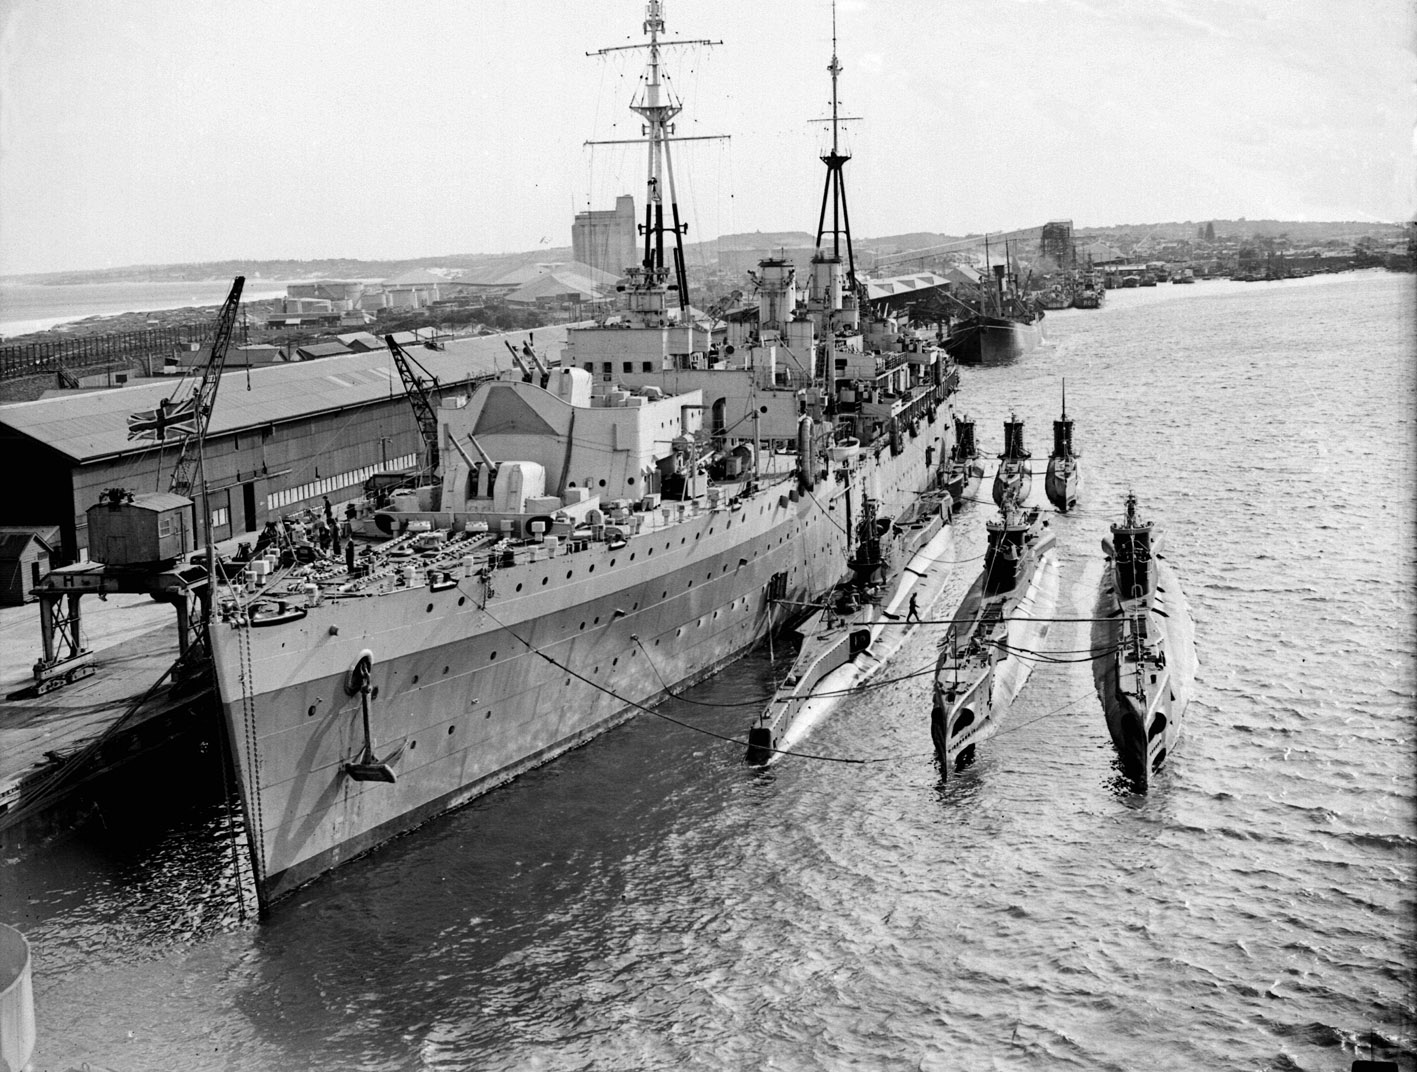 HMS Adamant and British submarines in Fremantle Harbour in Western Australia, 1946. View full size.